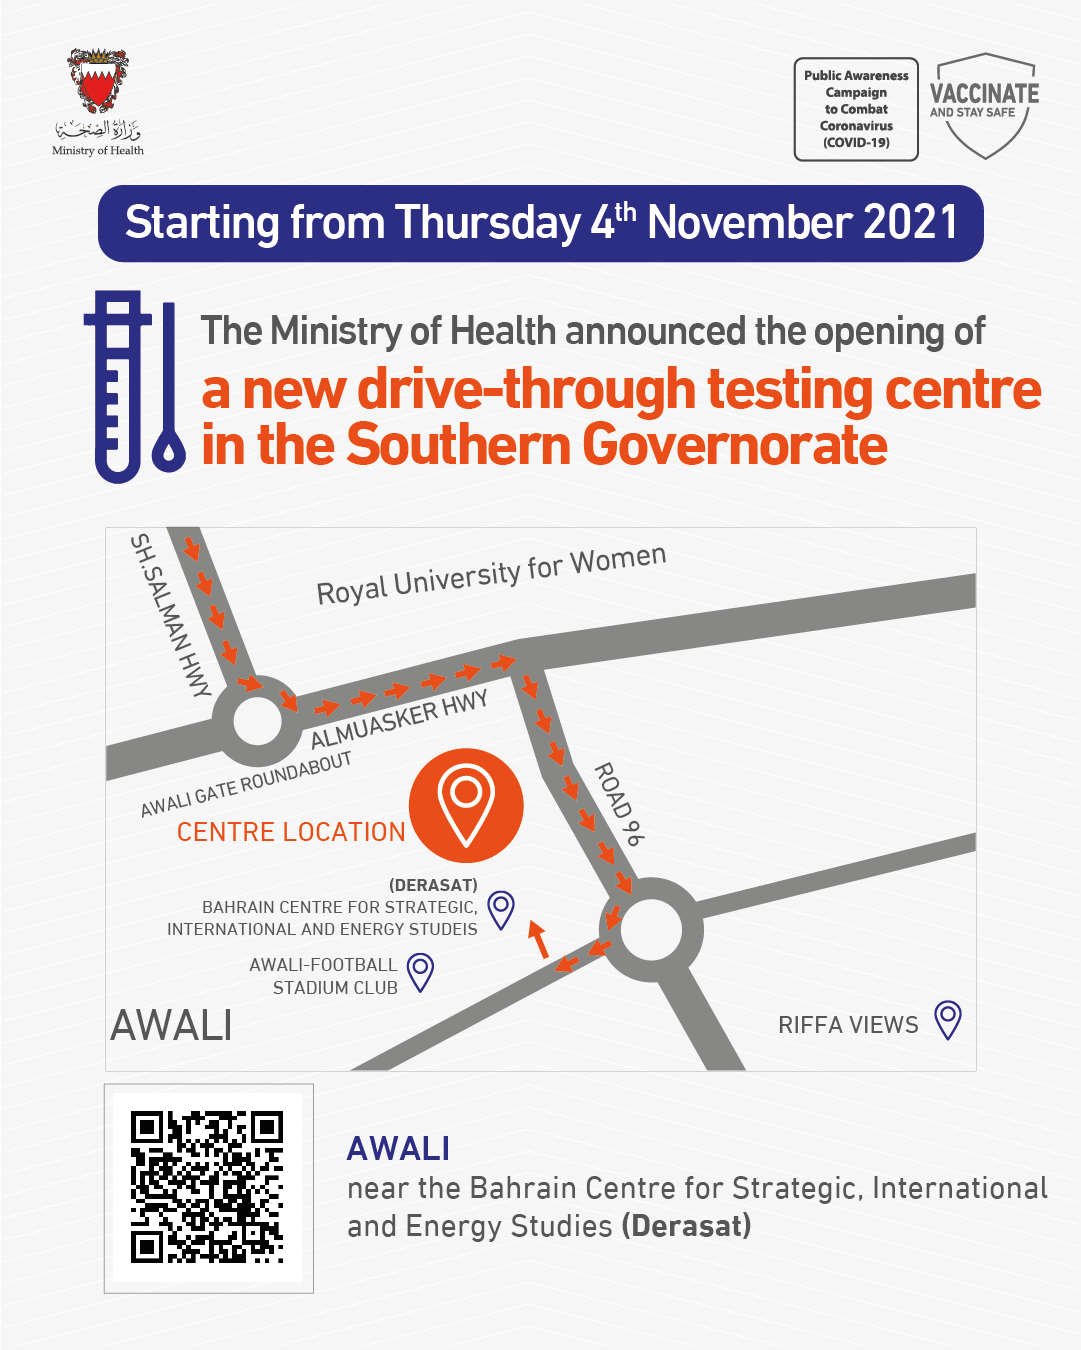 MOH opens new drive-through COVID-19 testing centre in the Southern Governorate